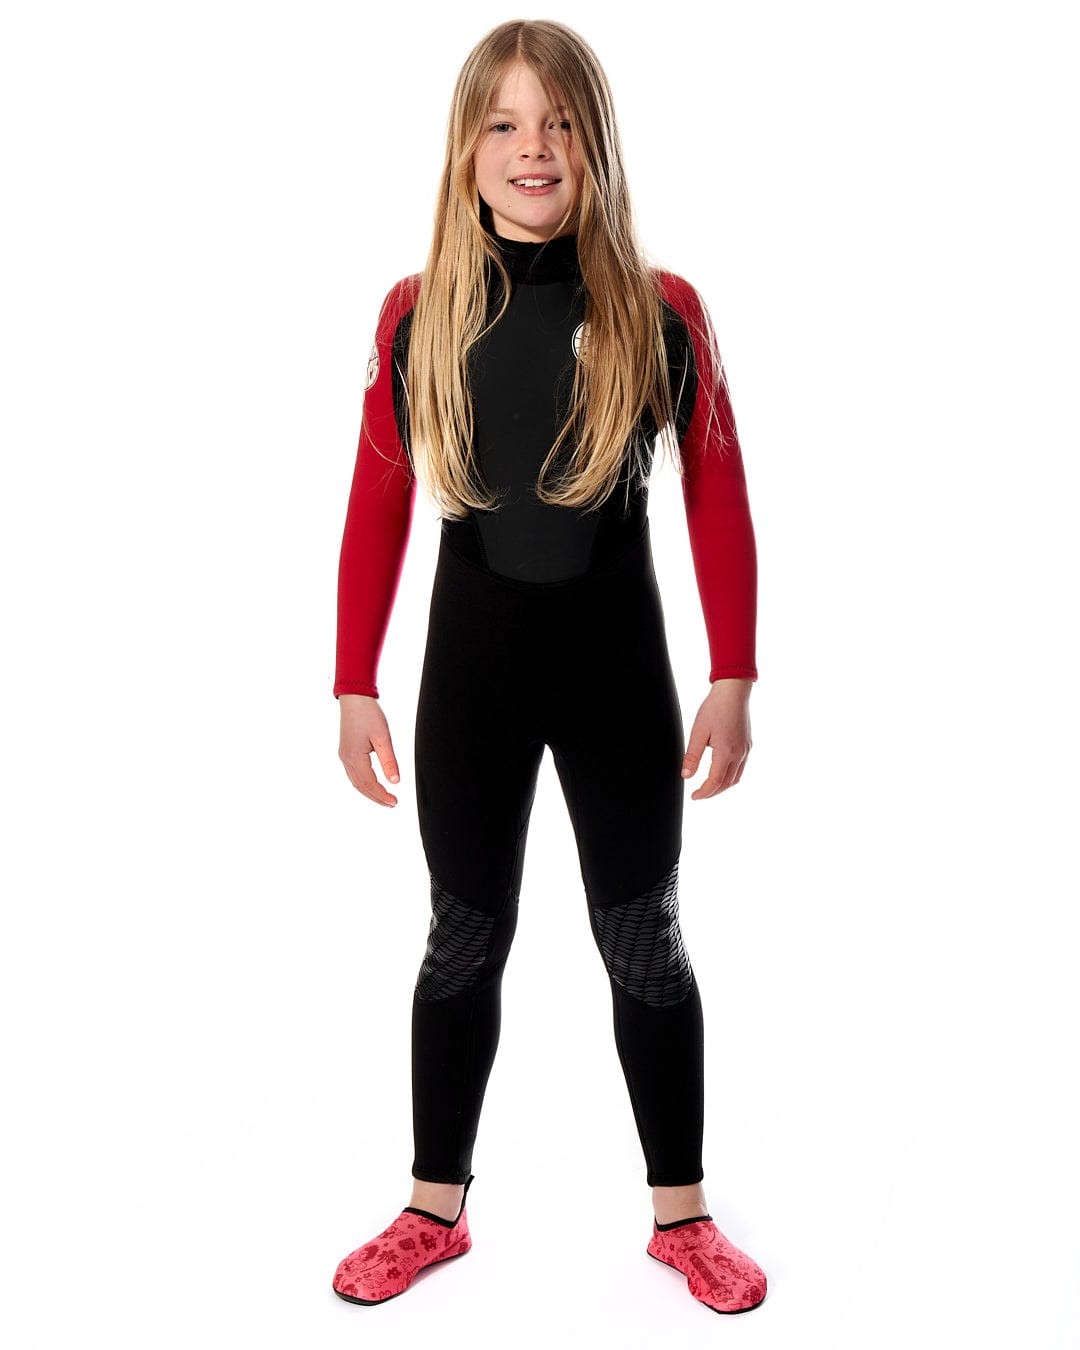 A young girl in a Saltrock Core - Kids 3/2 Full Wetsuit - Red posing for a photo.